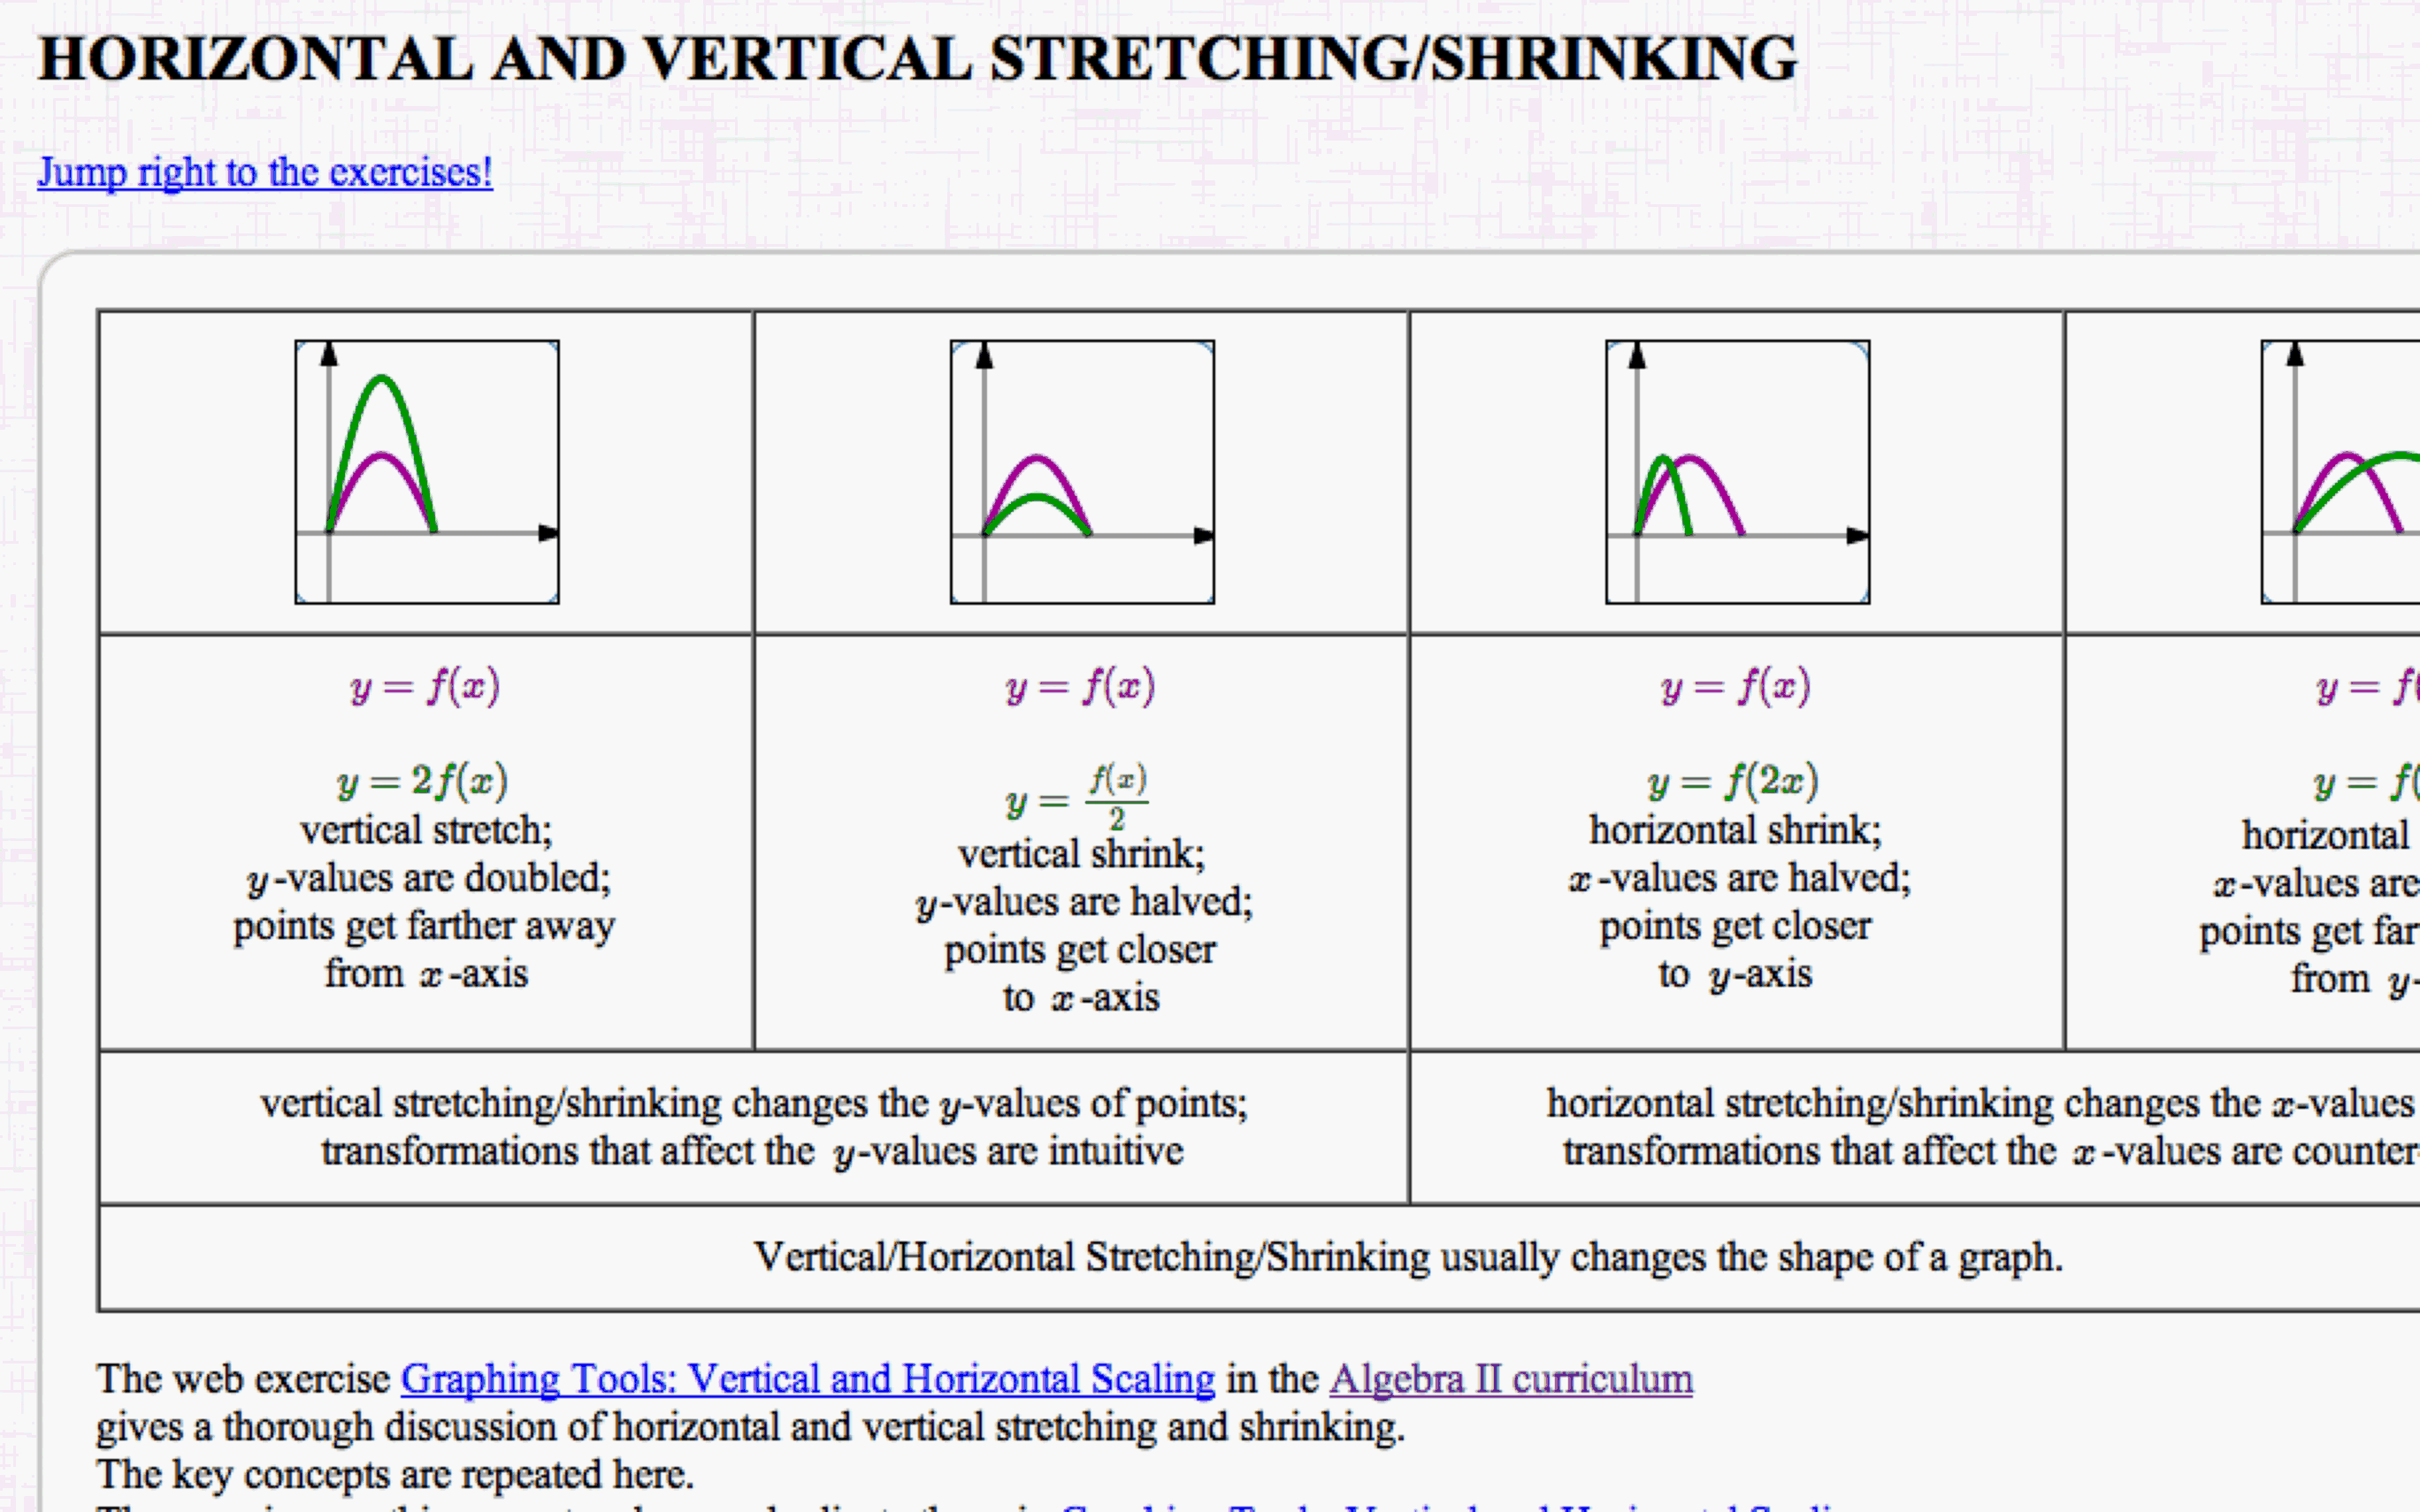 Horizontal and Vertical Stretching/Shrinking